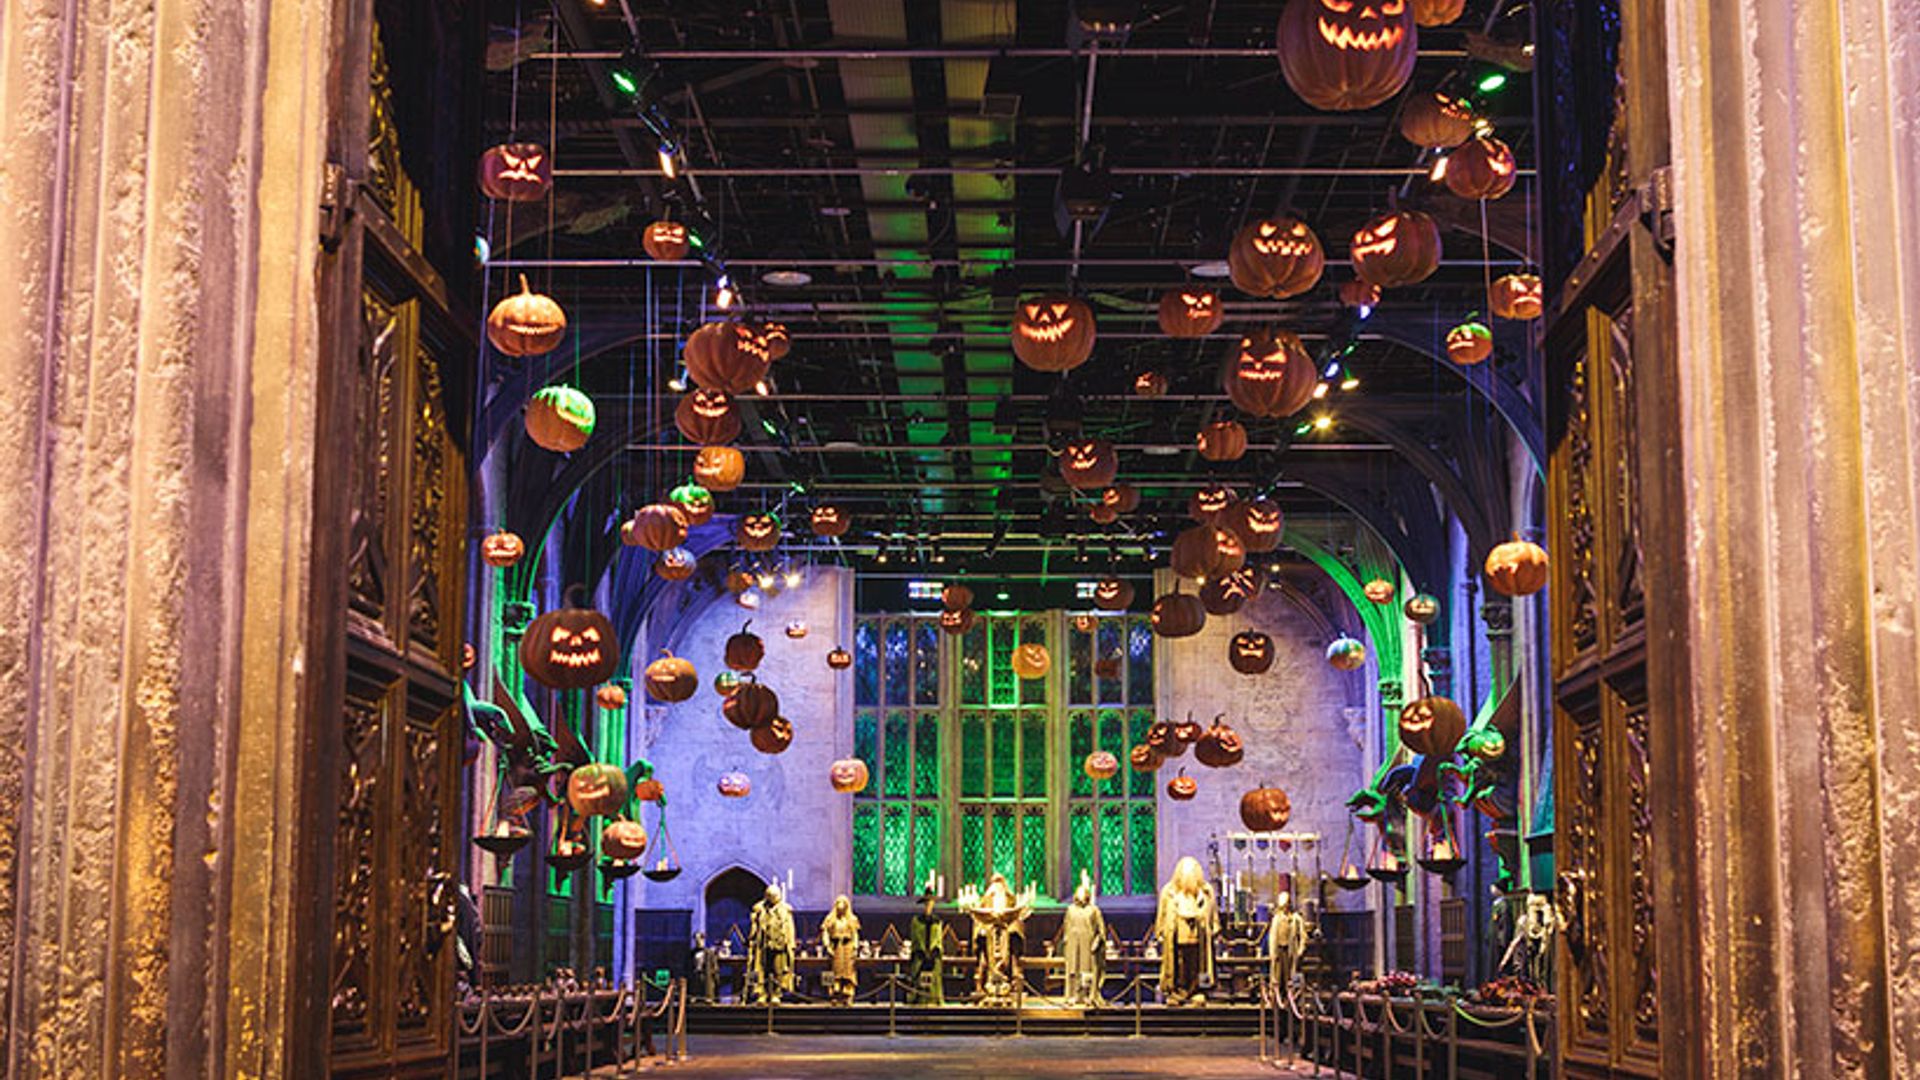 Harry Potter fans can enjoy a Halloween feast in the Hogwart Great Hall  HELLO!